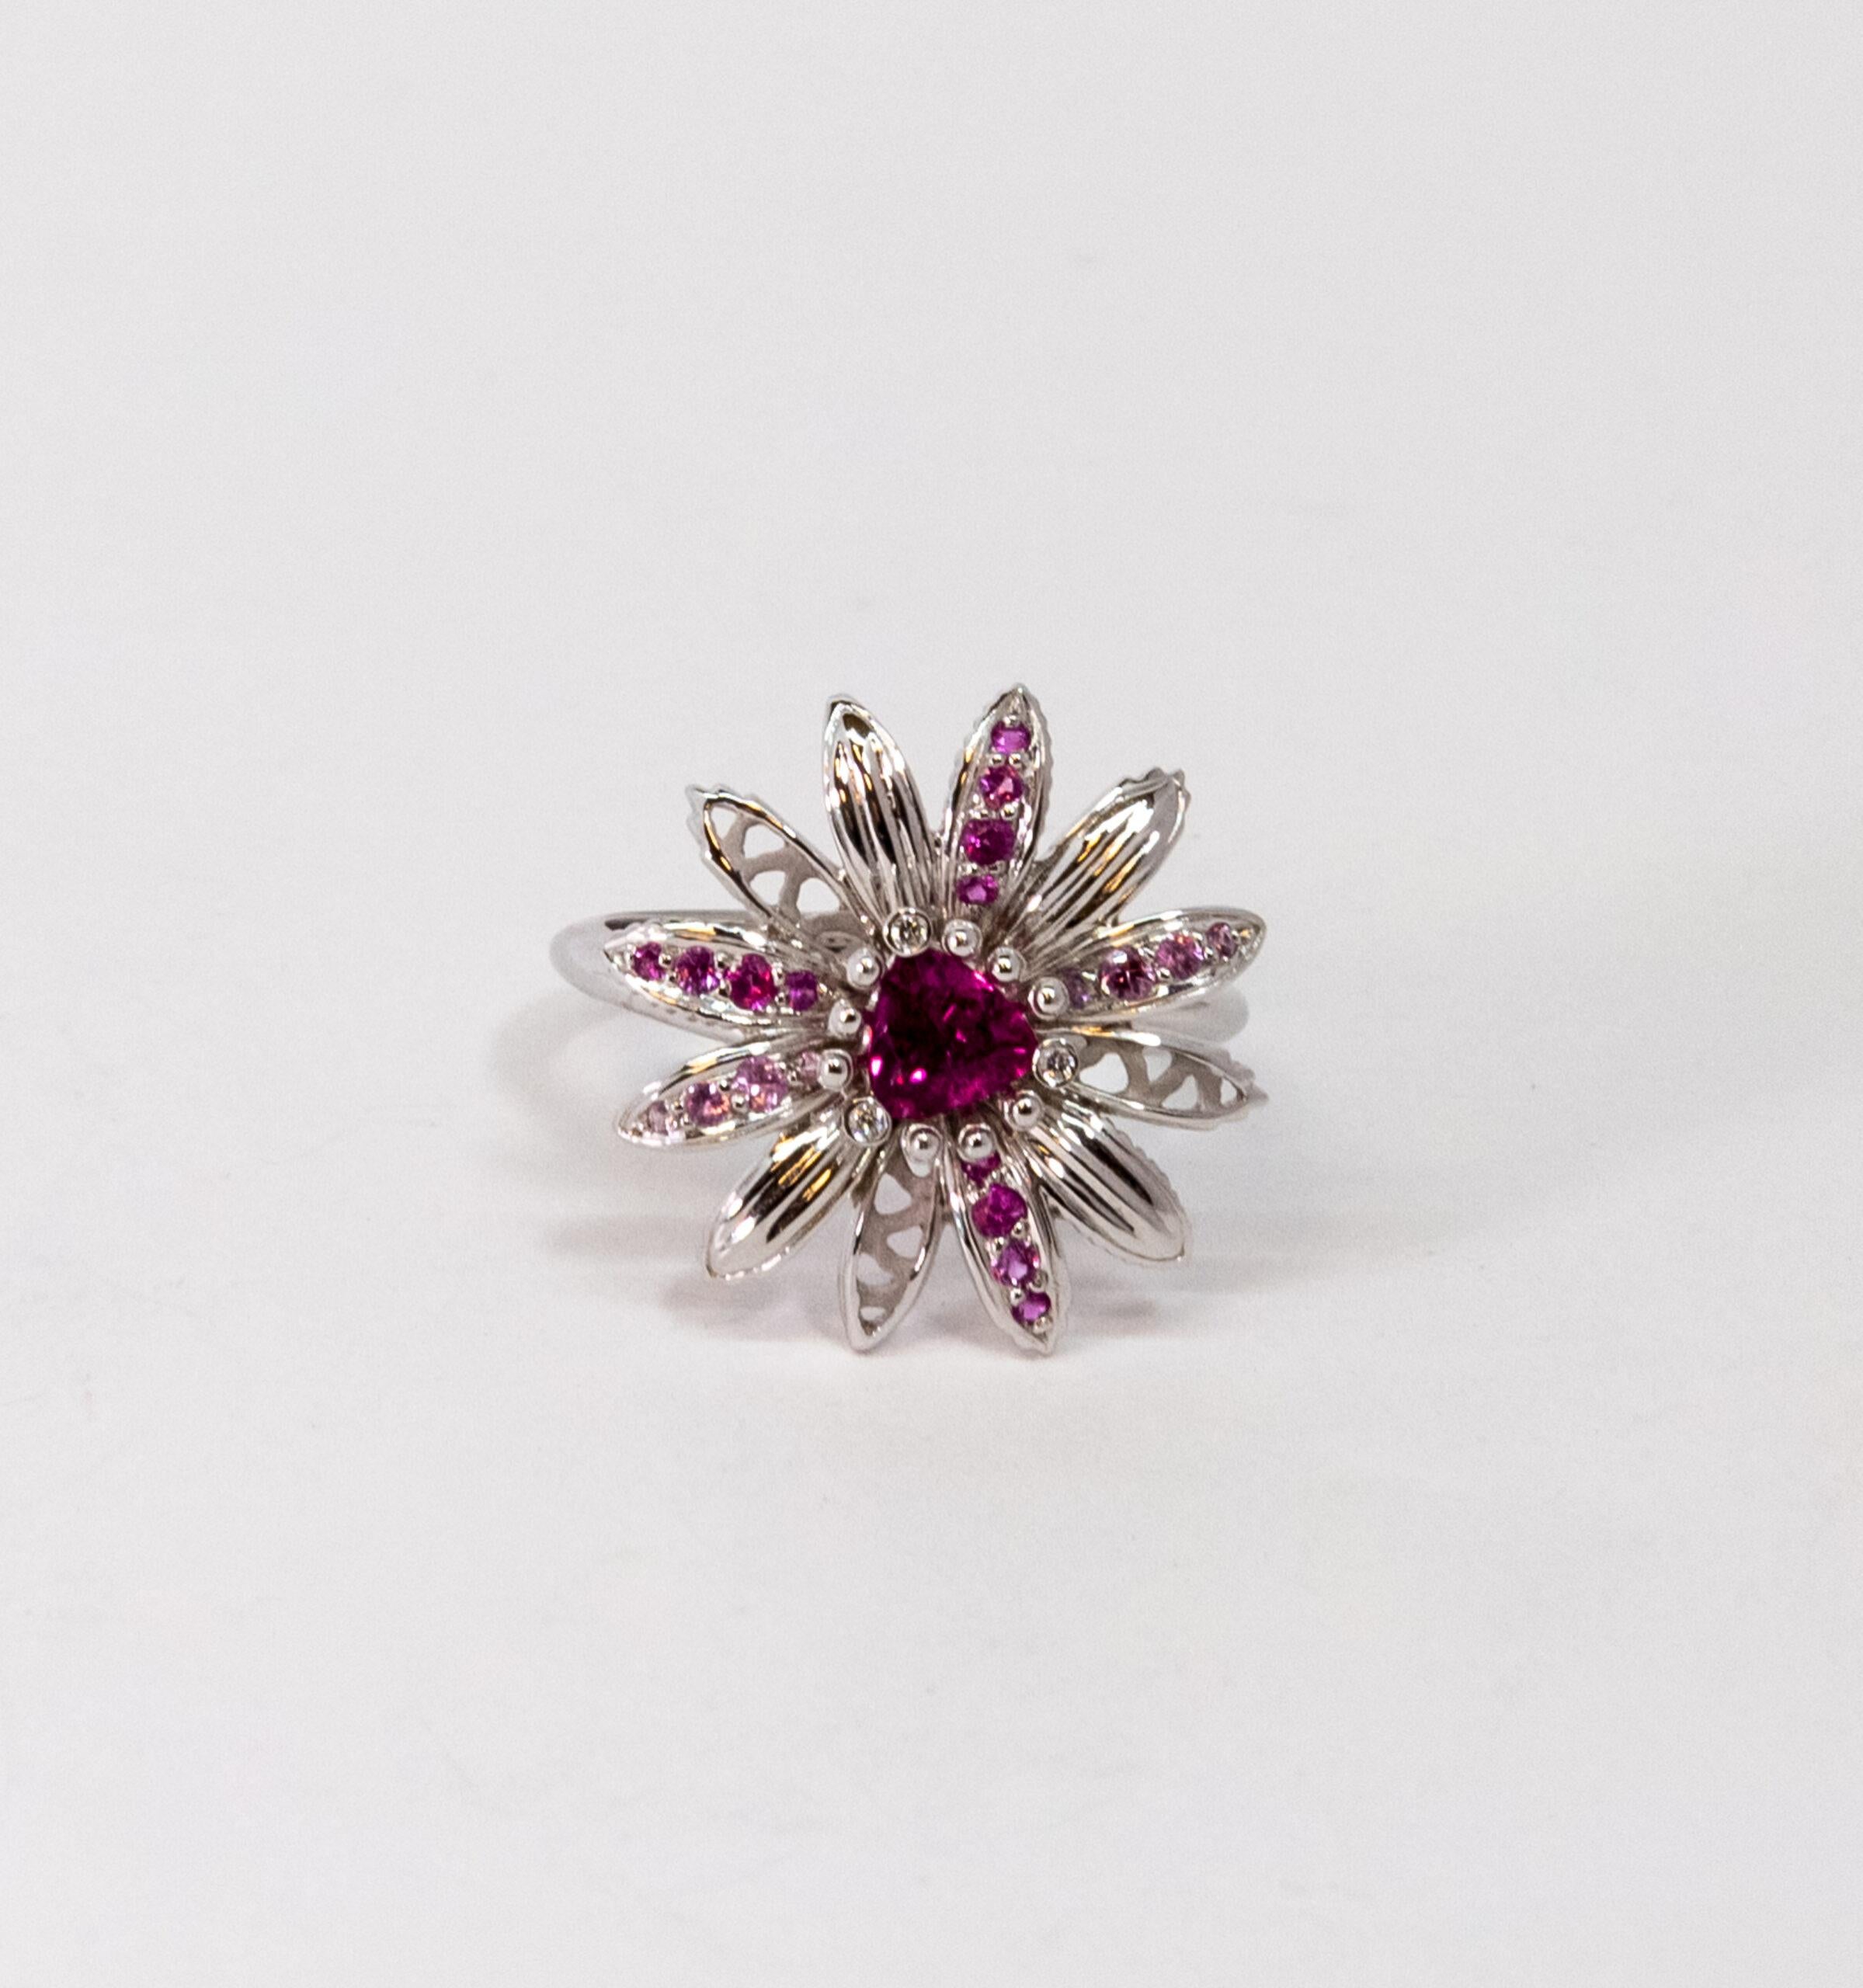 10070190 Carrera y Carrera  
This ring is made of 18K White Gold. The flower-shaped front side is decorated with triangle-cut main Pink Sapphire stone and light pink and dark pink side stones on petals totaling ~0.38ct. Main stone is surrounded by